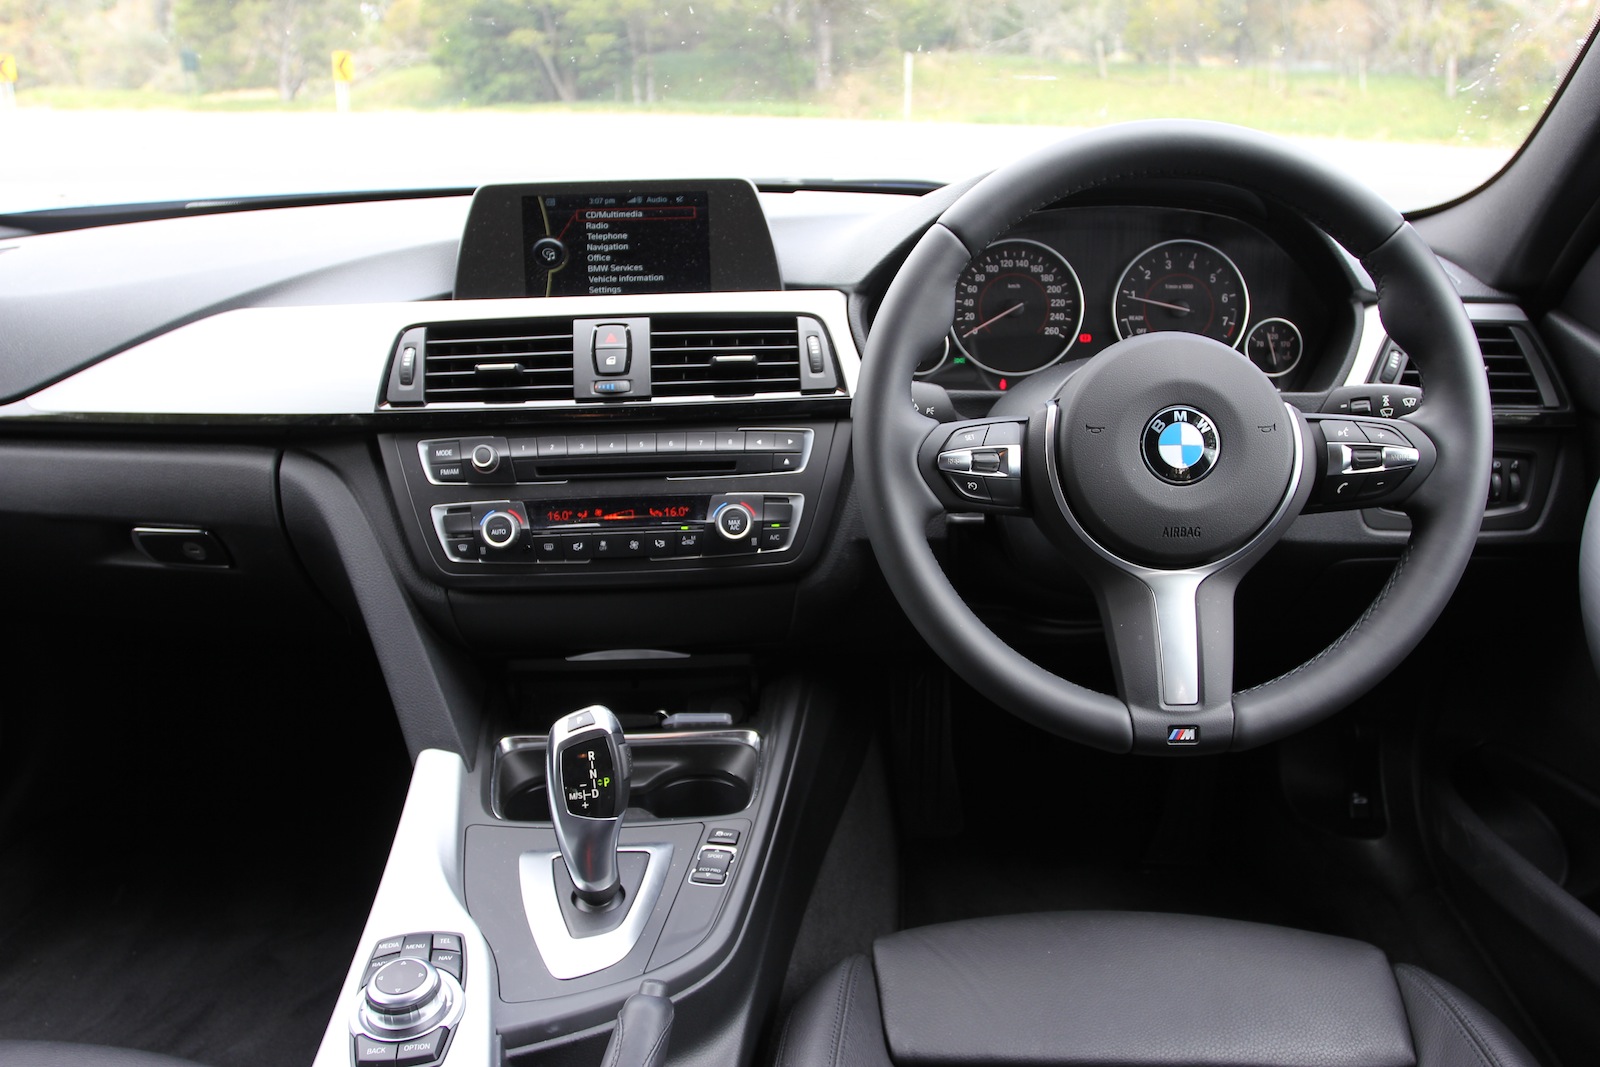 Bmw 316i automatic review #2